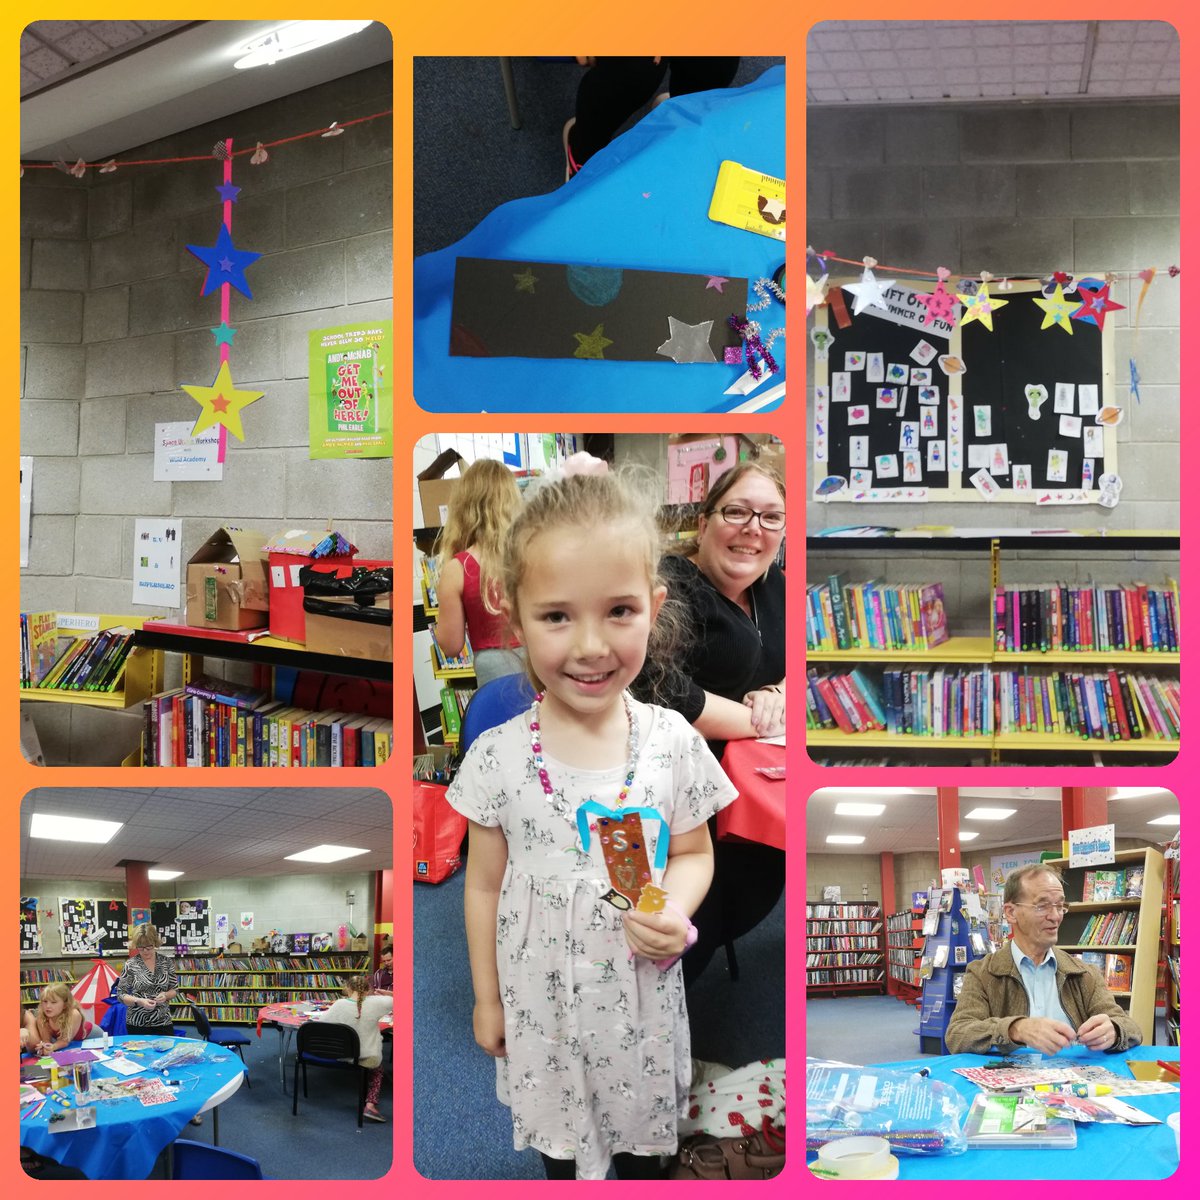 Never a dull day at #WeMadeThis HQ - today's our last session at Fred Moore library. Come and join us between 3 and 5pm to make some more bookmarks and stars - that washing line wants filling up! @BTOHull @hull_libraries